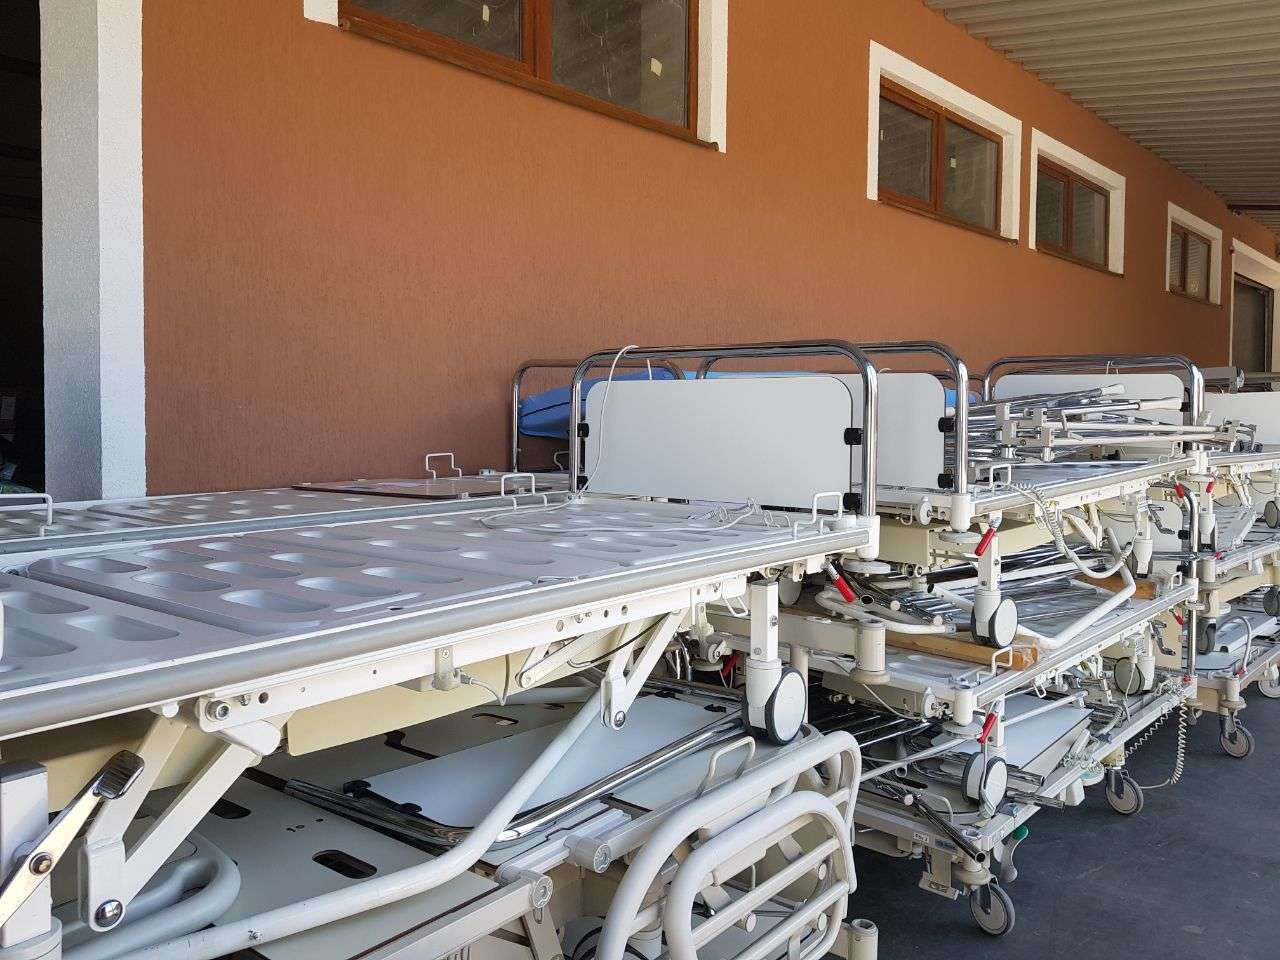 Another shipment of medical beds was delivered to Ukrainian hospitals by Austrian volunteers